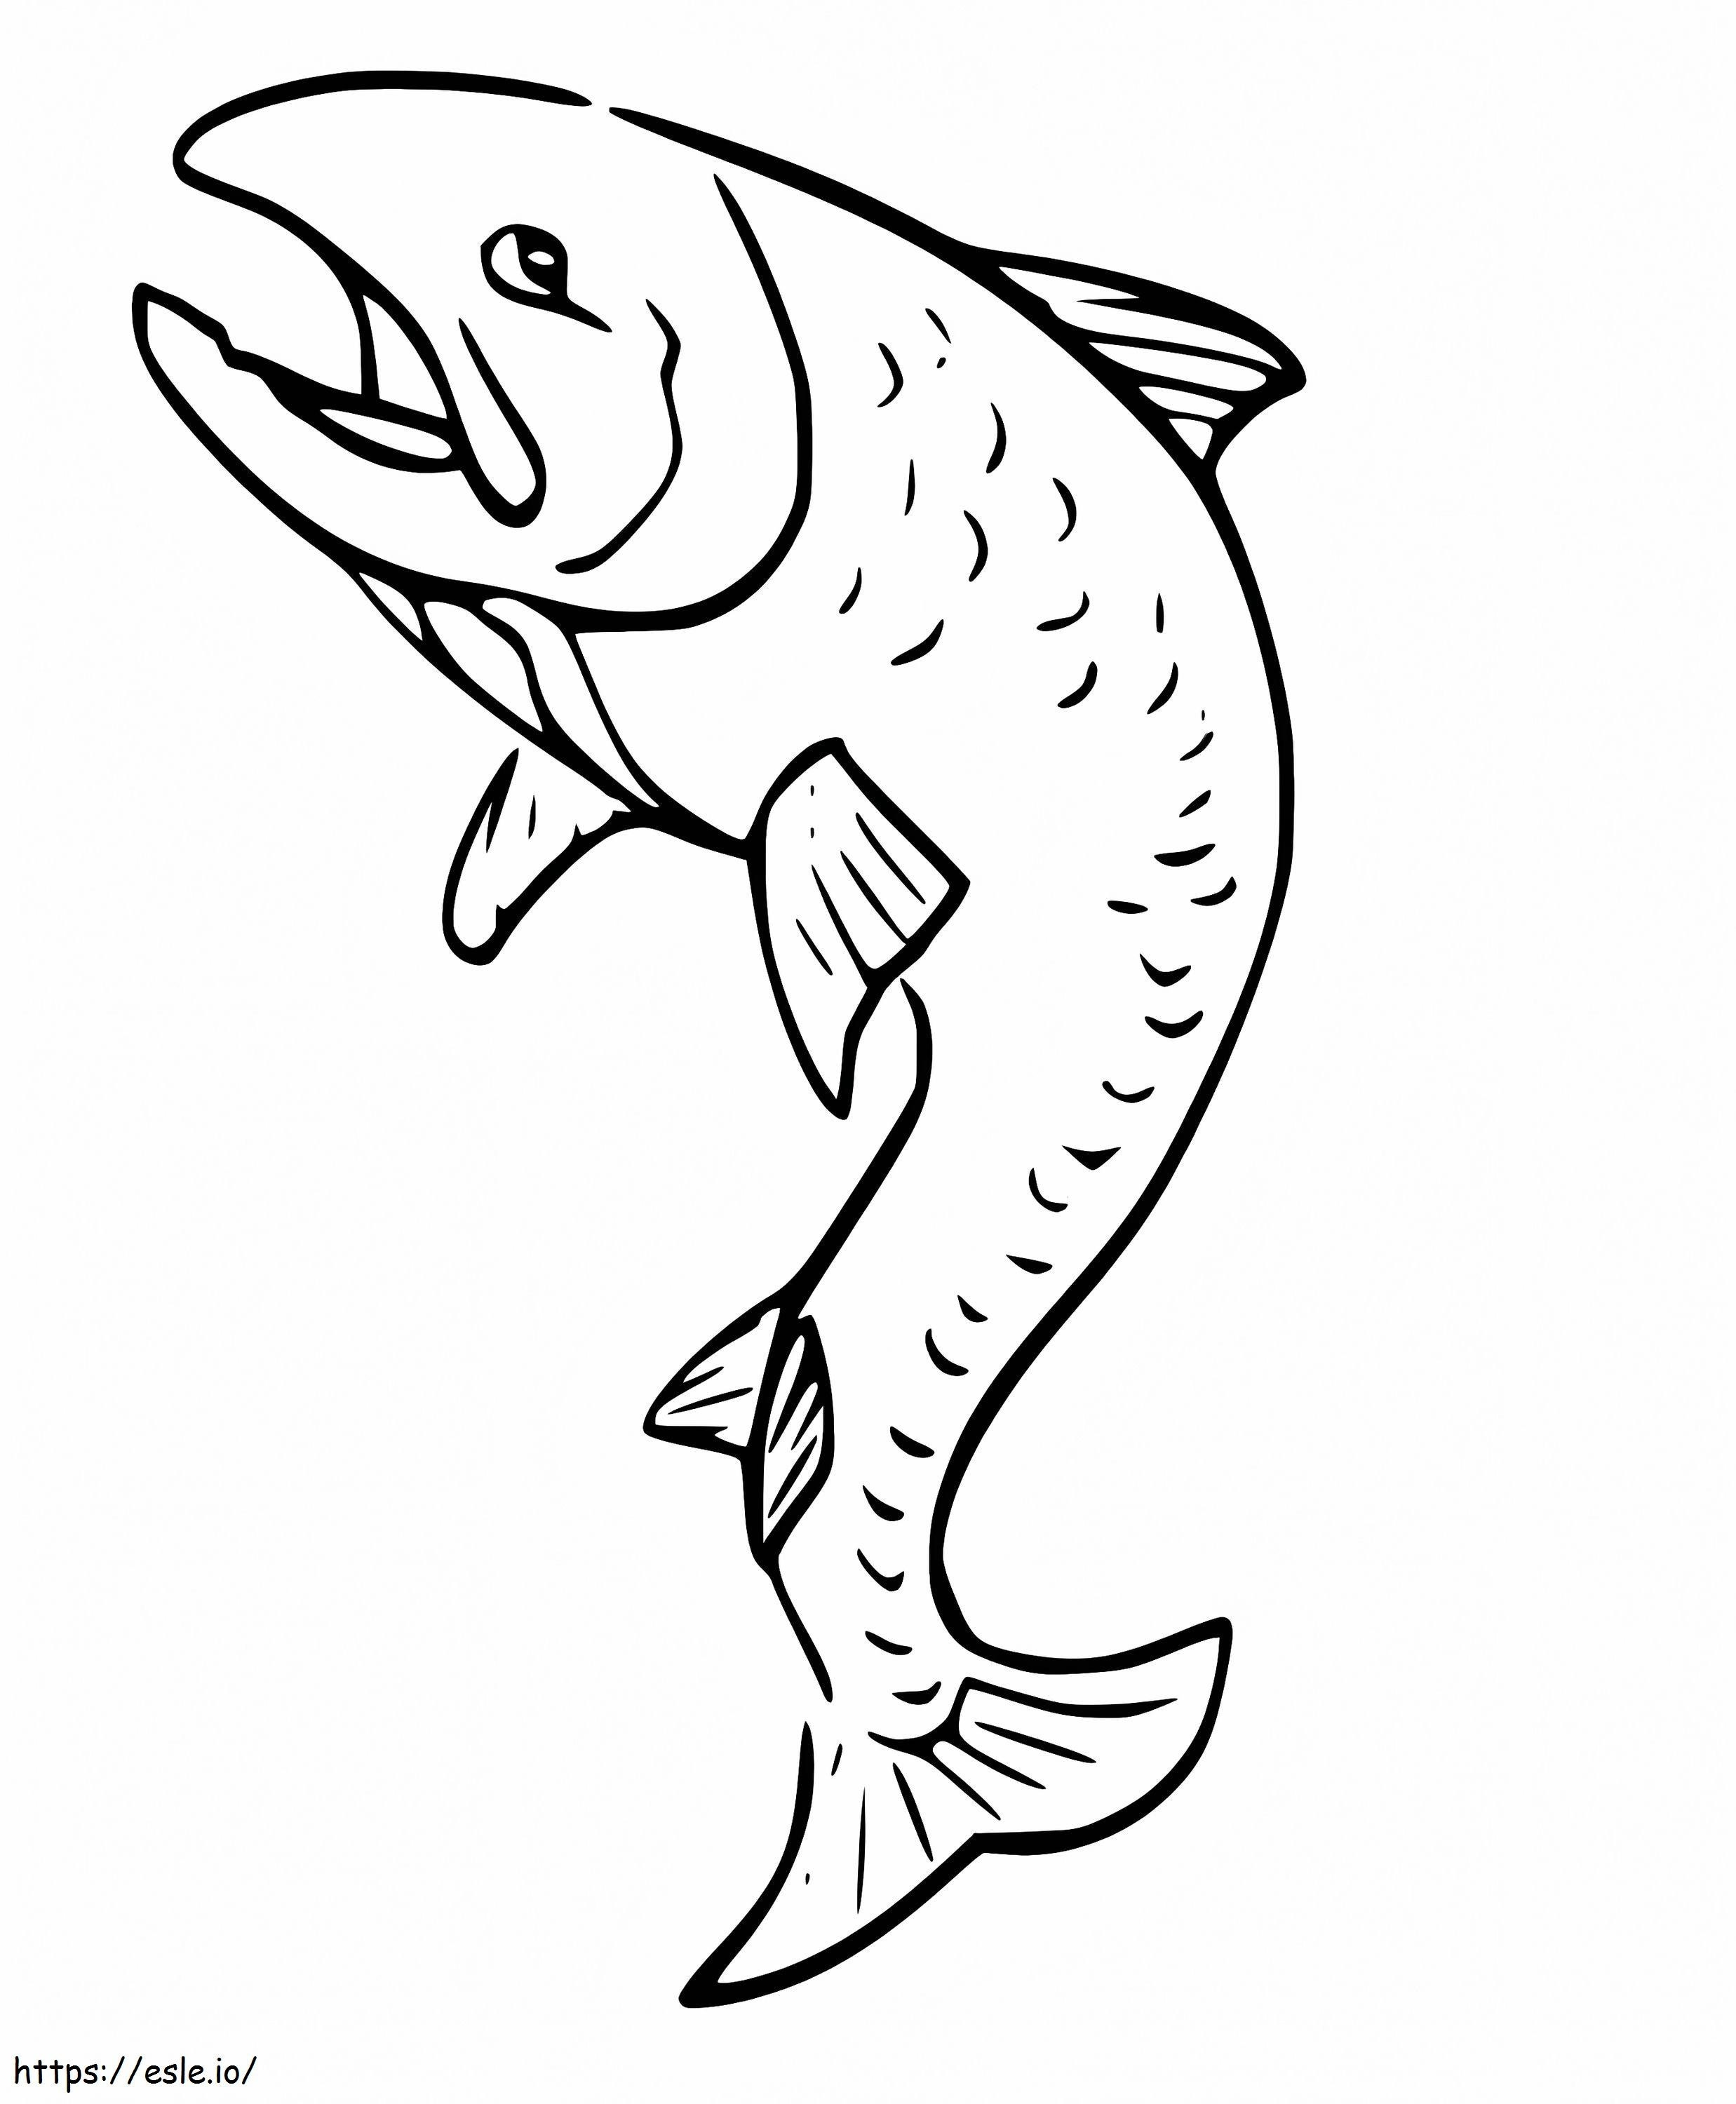 Funny Salmon coloring page